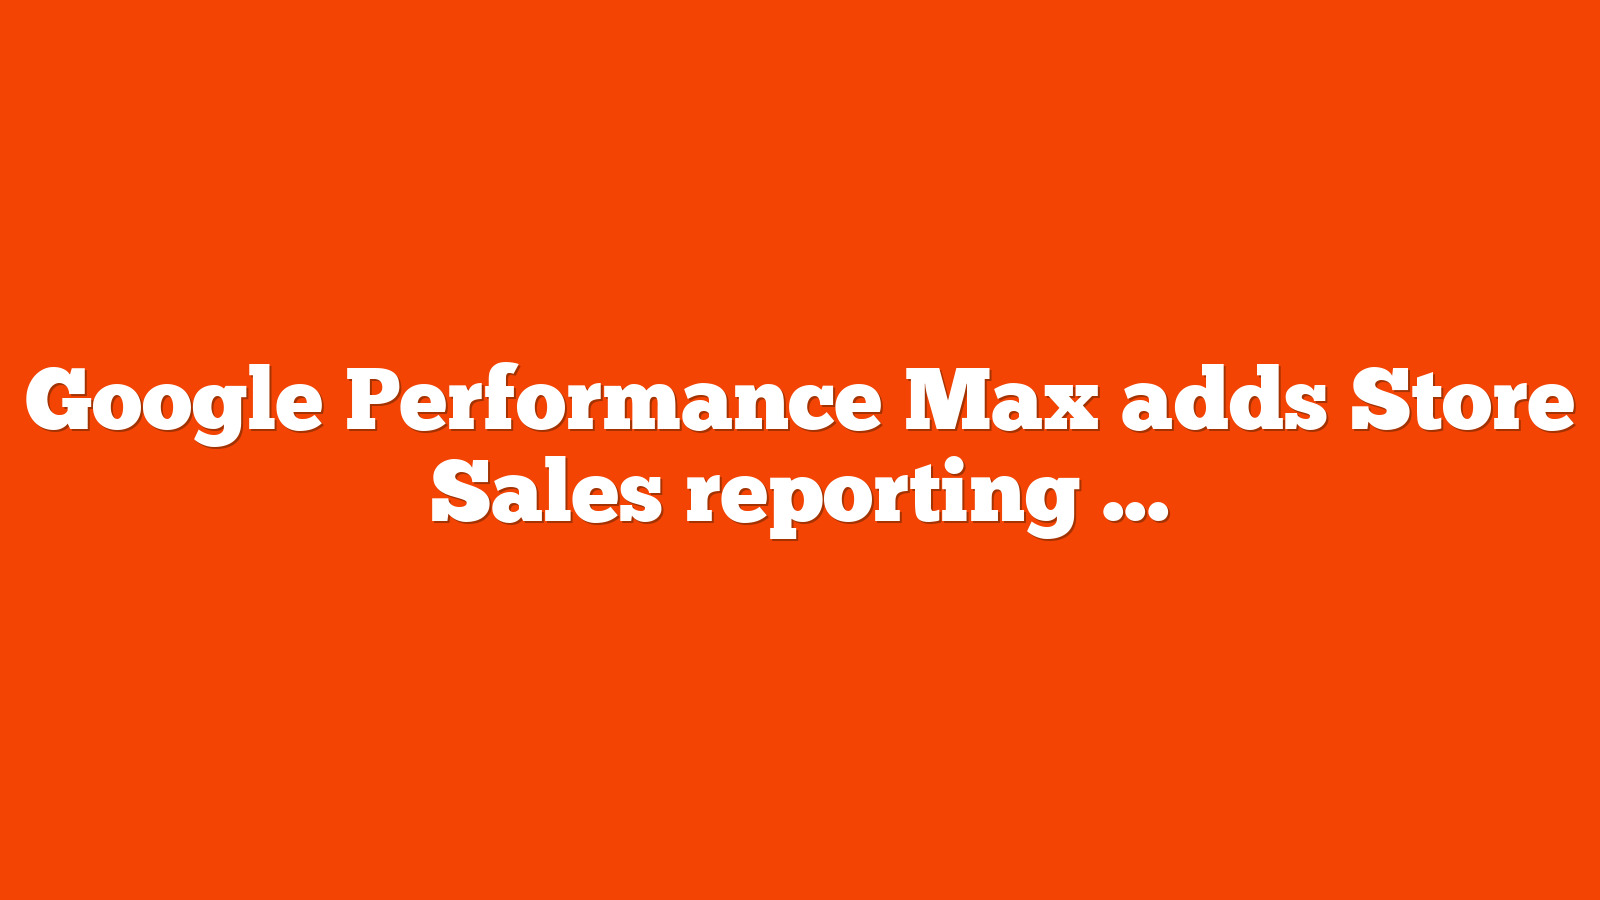 Google Performance Max adds Store Sales reporting bidding